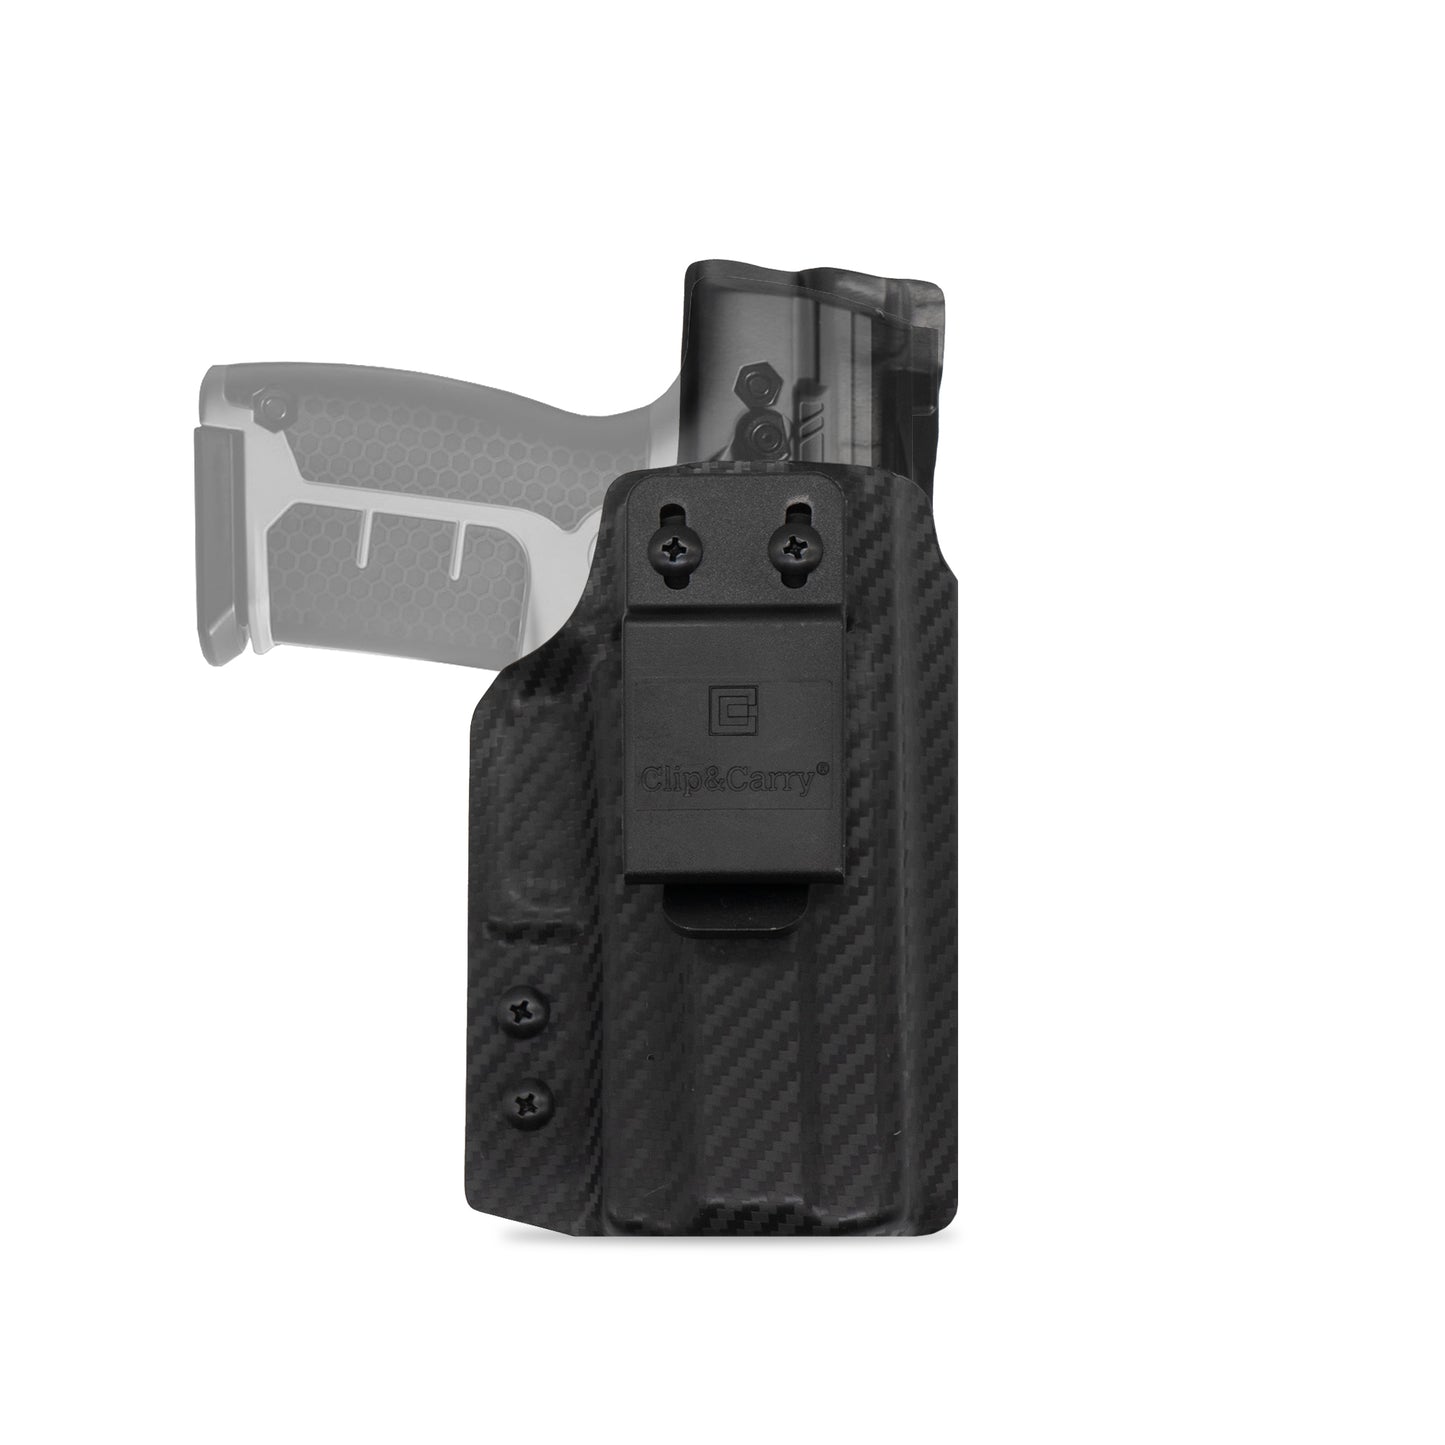 IWB Holster for the Byrna SD/EP